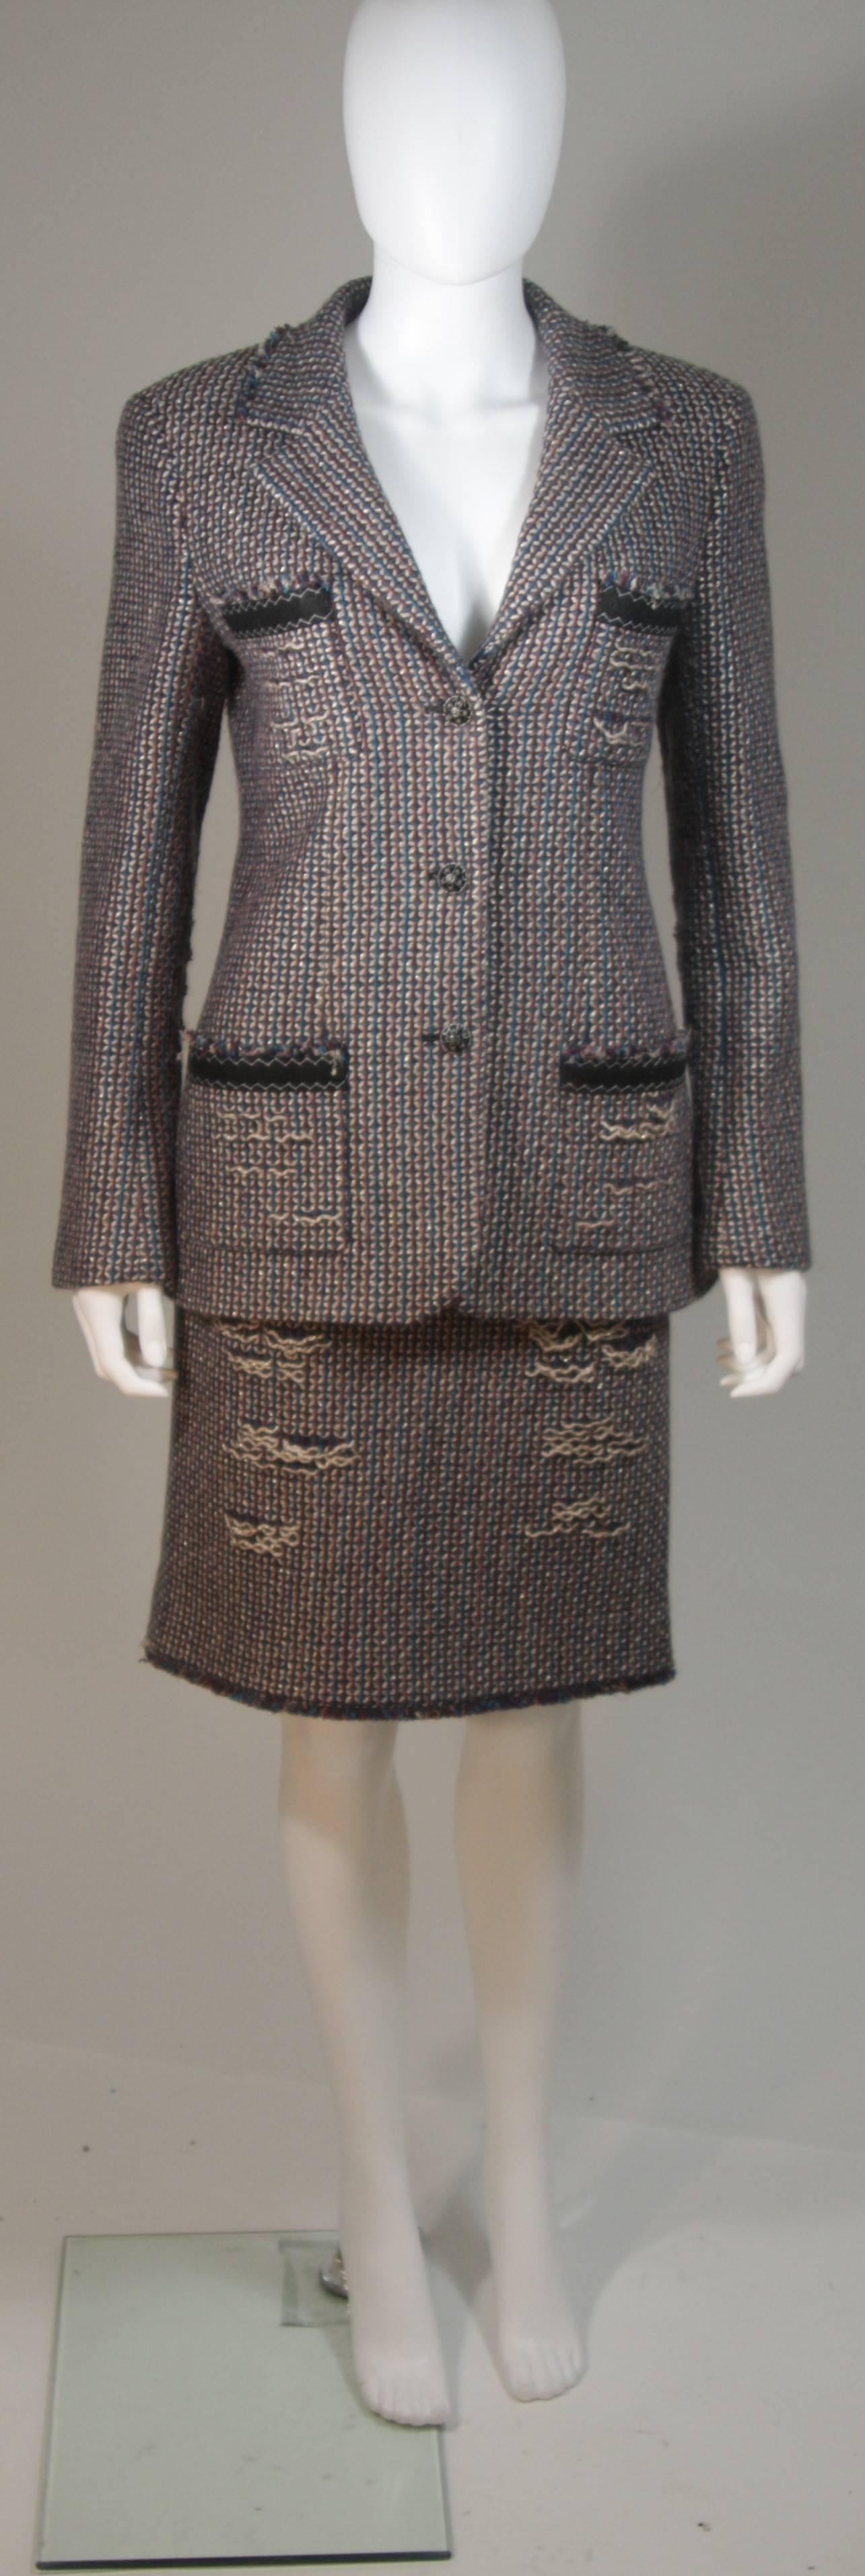 This Chanel skirt suit is composed of a multi color tweed with gold accents through out, complimenting the bas colors of burgundy and brown with blue. The jacket features front pockets with center front button closures. The skirt has a center back